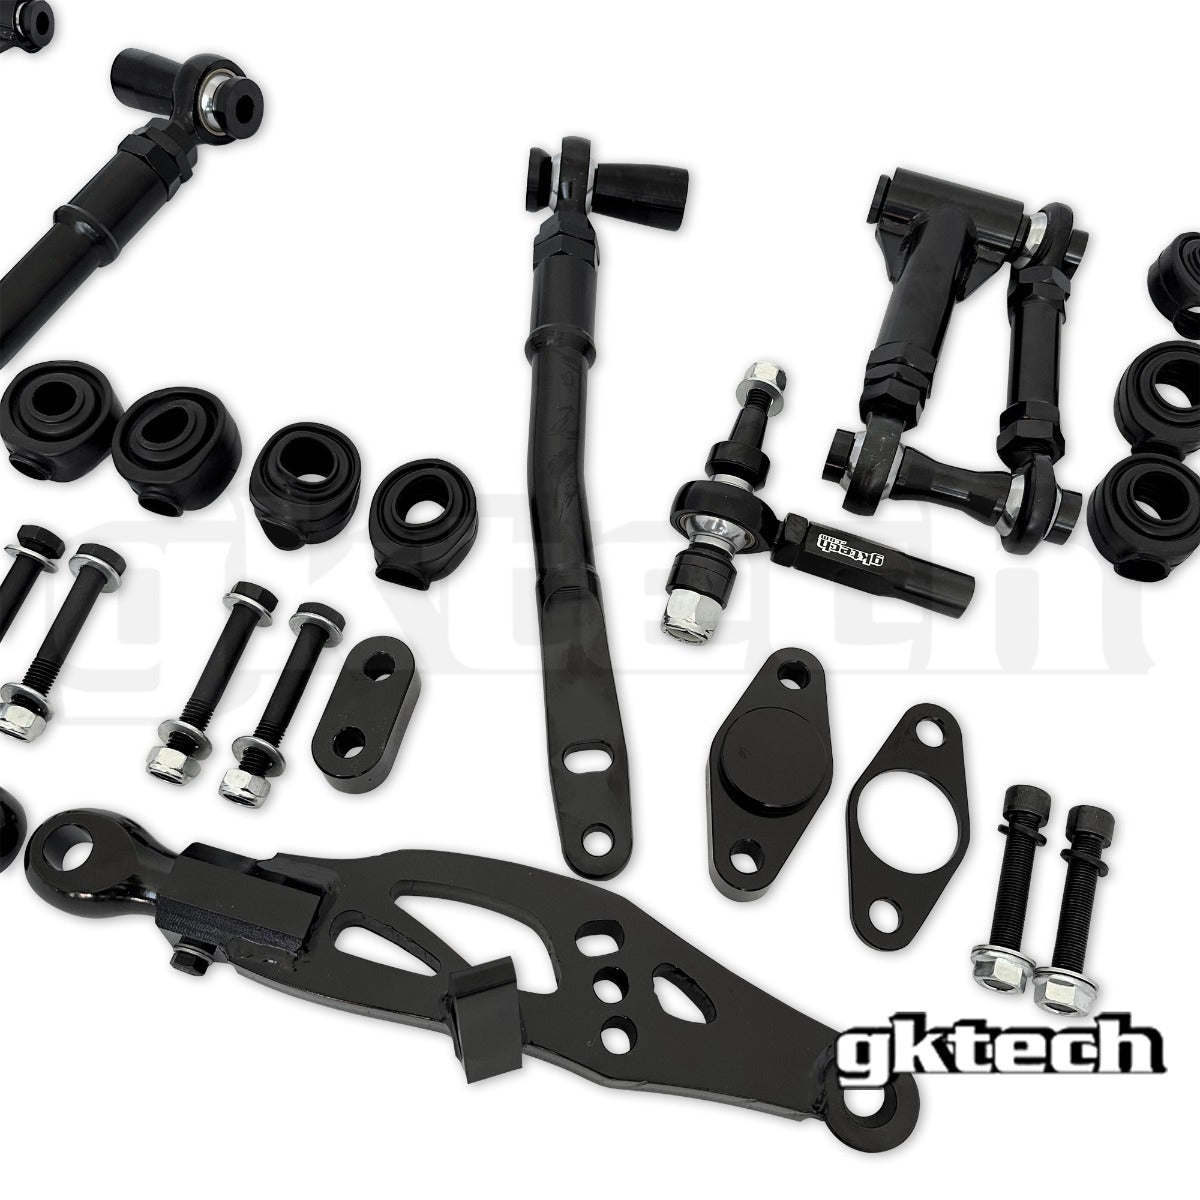 R32 GT-R / GTS4 Front Suspension arm package (10% combo discount)